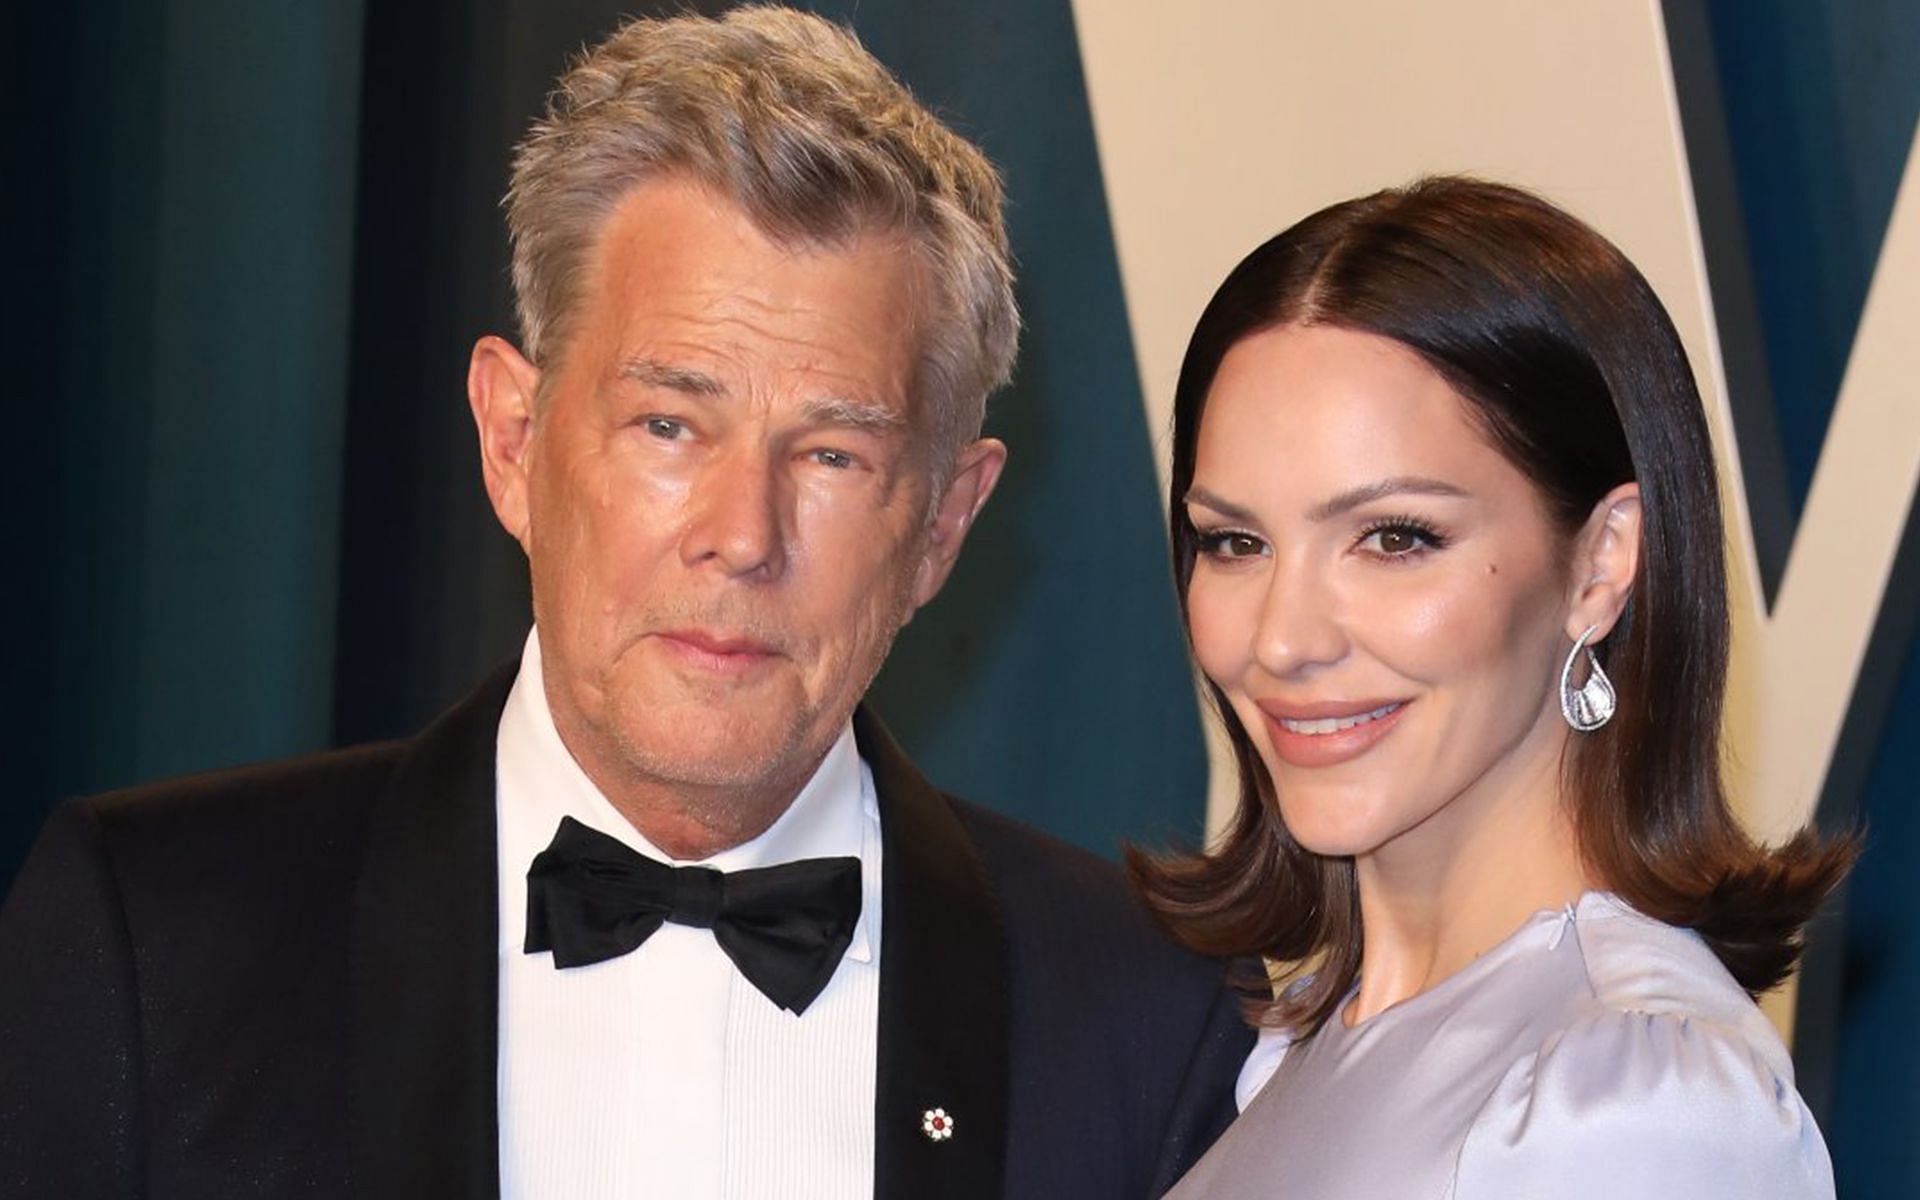 Katharine McPhee and David Foster tied the knot in October 2020 (Image via Getty Images/ Toni Anne Barson)